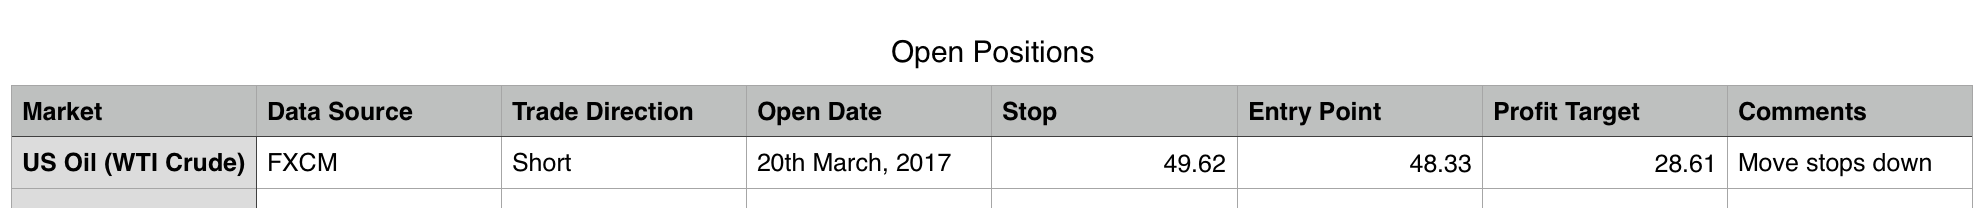 Trading Room Open Positions 2017